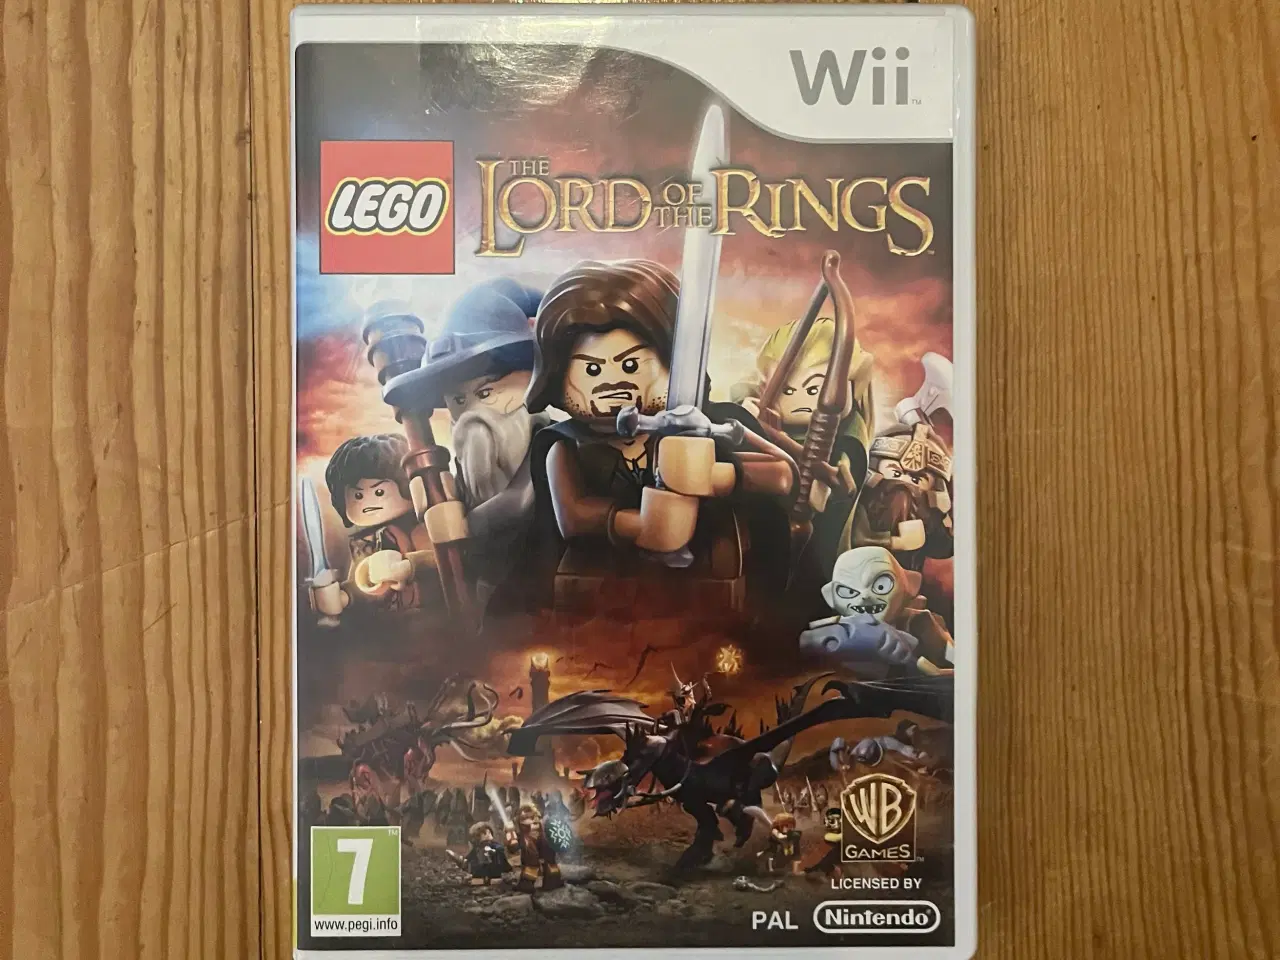 Billede 1 - Lord of the rings wii